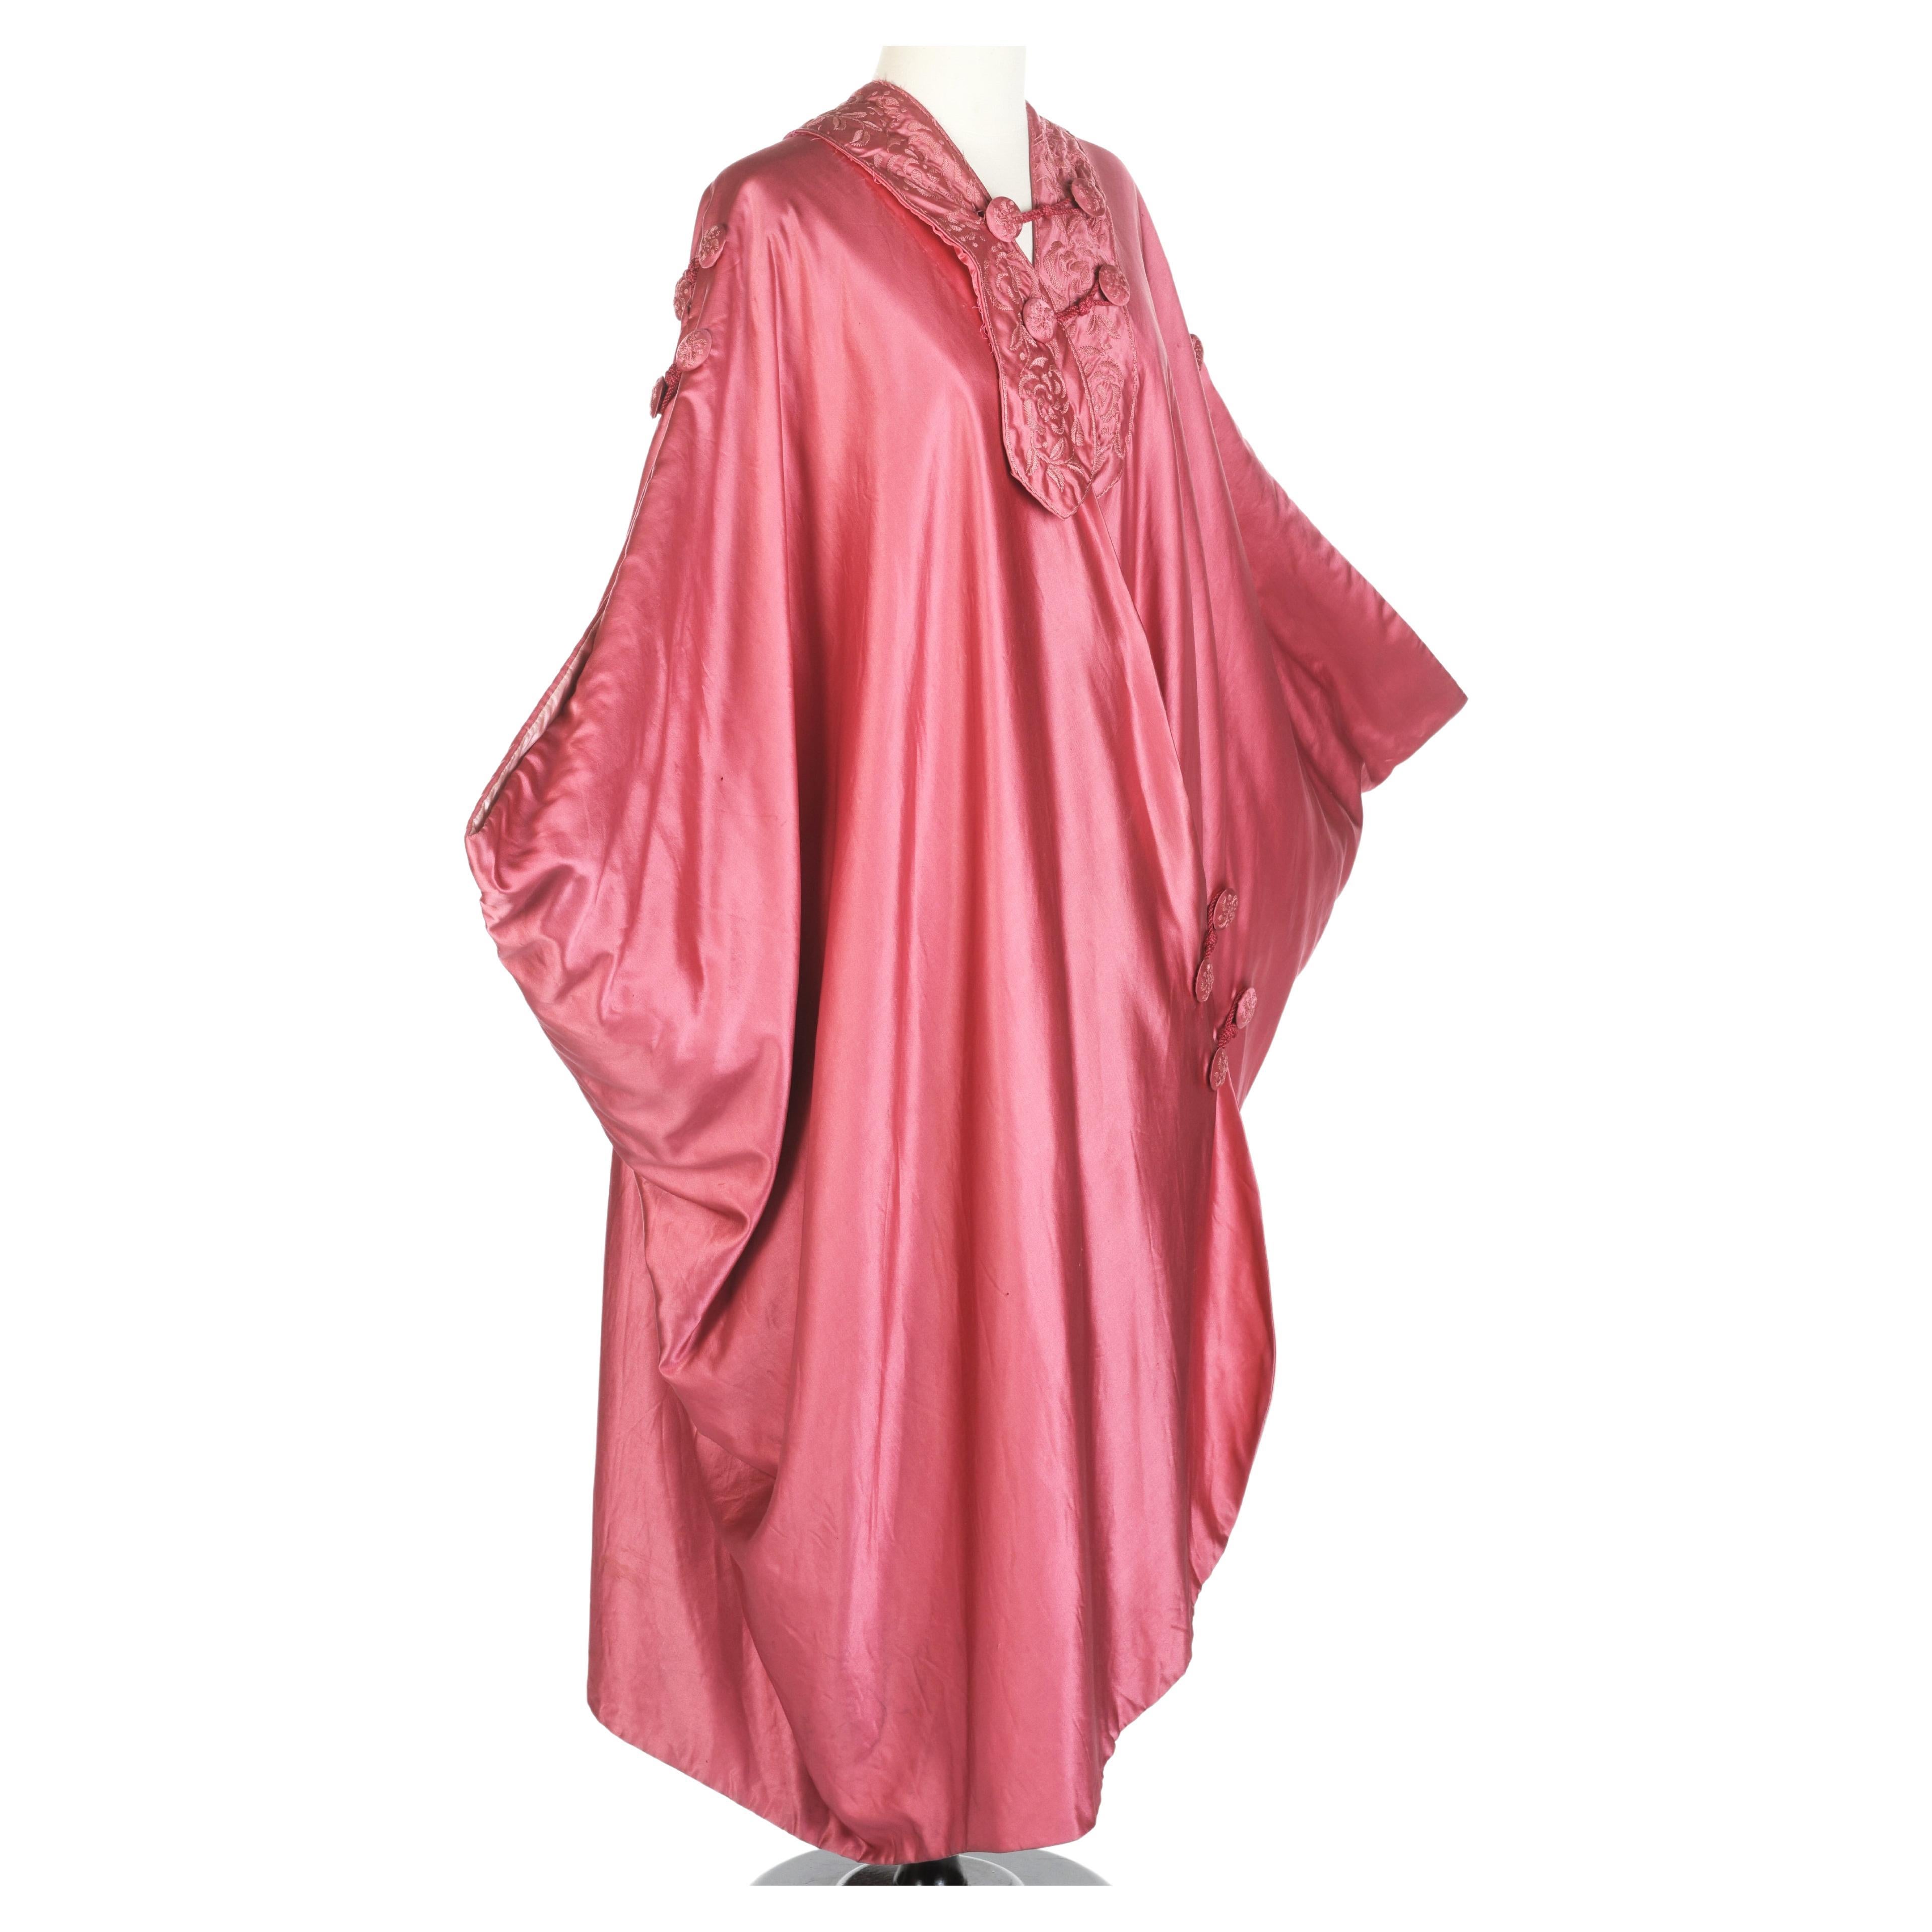 Circa 1915 - 1925
France for cutting
Asia Manila for the textile

Fuchsia pink embroidered satin evening cape attributed to Liberty of London, a famous British House Circa 1915/1925. Fleece cloak with side cross flap and large bonnet with tapered